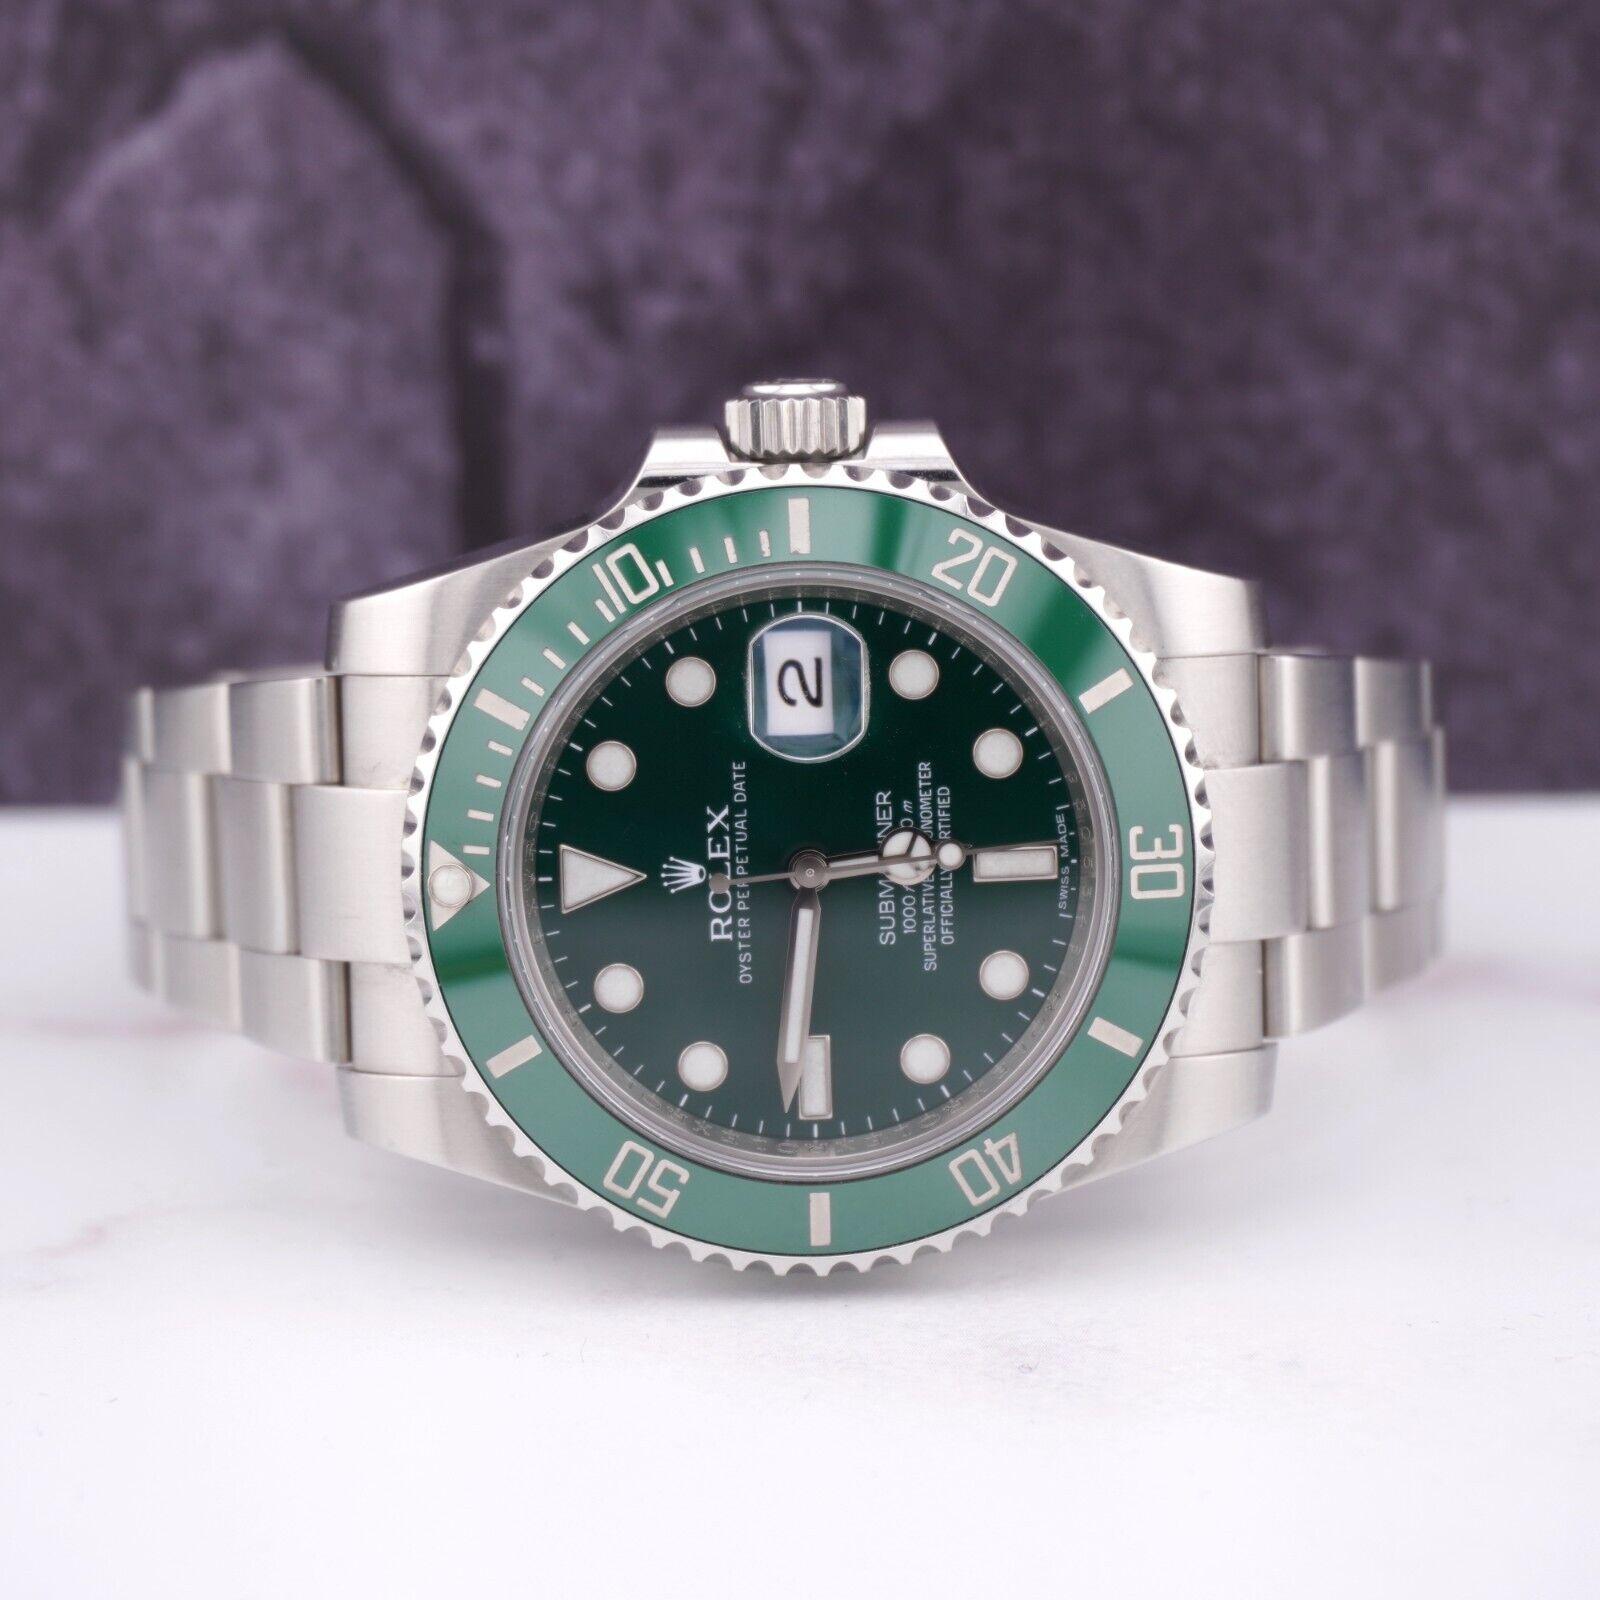 Rolex Submariner Hulk 40mm Watch. A Pre-owned watch w/ Original Box and 2011 Card. Watch is 100% Authentic and Comes with Authenticity Card. Watch Reference is 116610LV and is in Excellent Condition (See Pictures). The Dial and Bezel color are Green